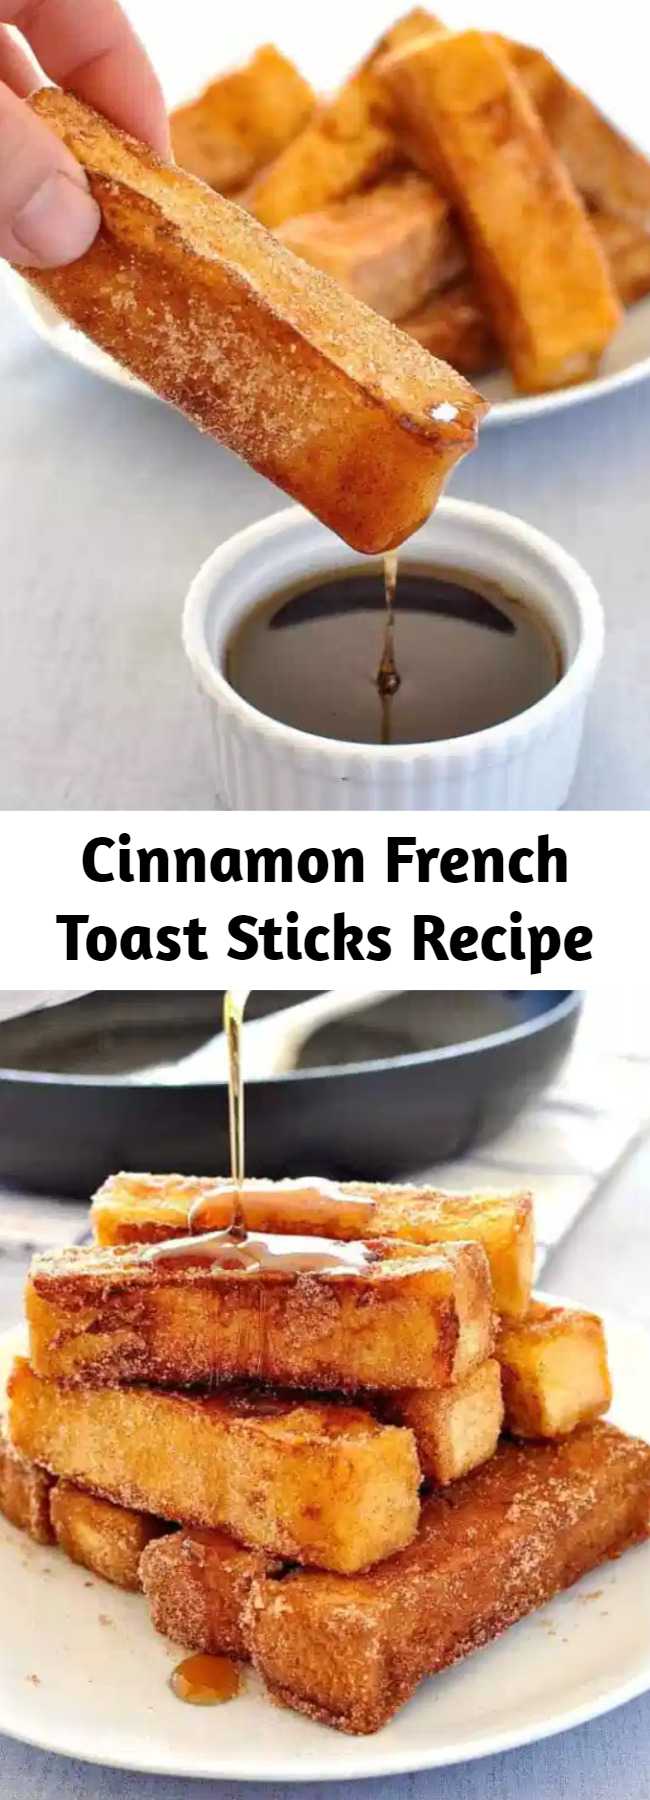 Cinnamon French Toast Sticks Recipe - Eat it with your fingers (tick), tastes like cinnamon doughnuts but a whole lot healthier (double tick)!